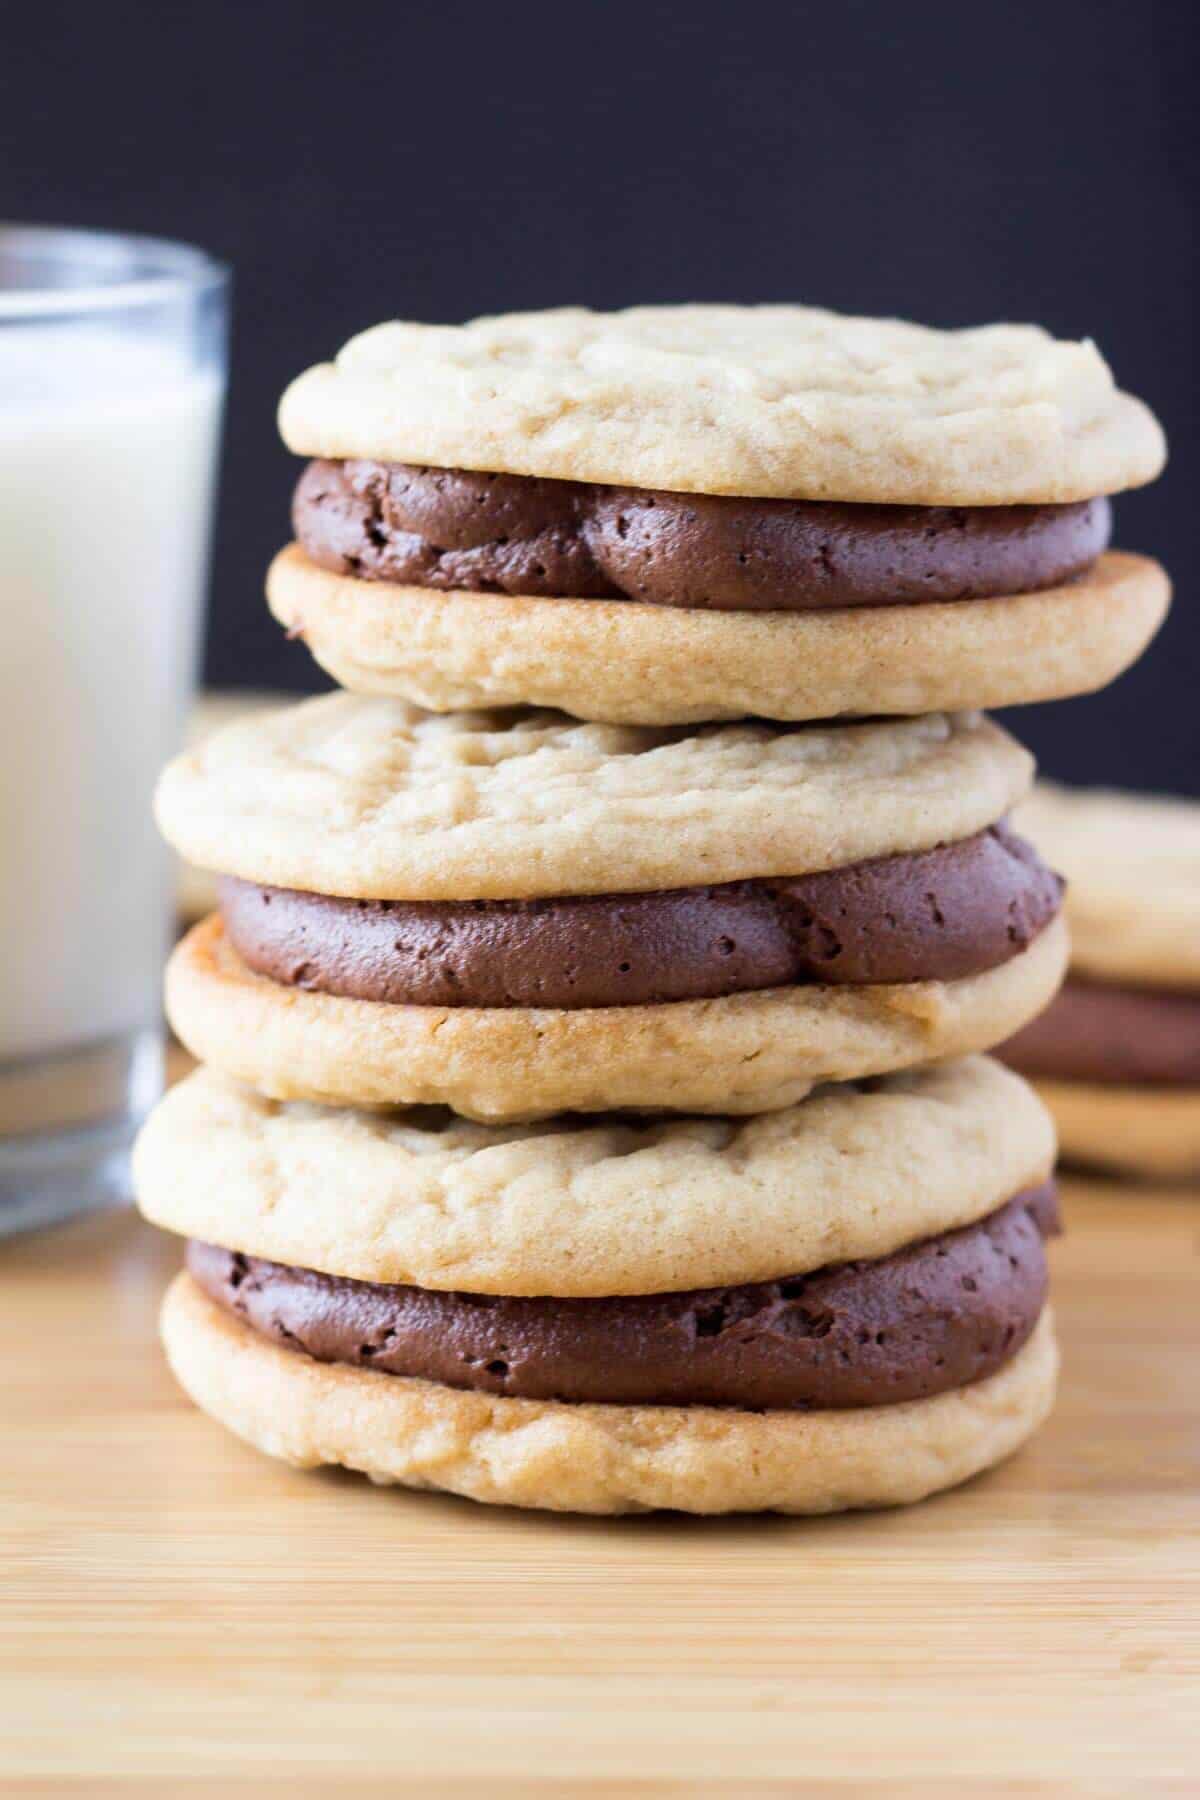 Two soft & chewy cookies slathered with milk chocolate buttercream. If you like peanut butter cups - these Peanut Butter Sandwich Cookies with Chocolate Frosting are for you. 